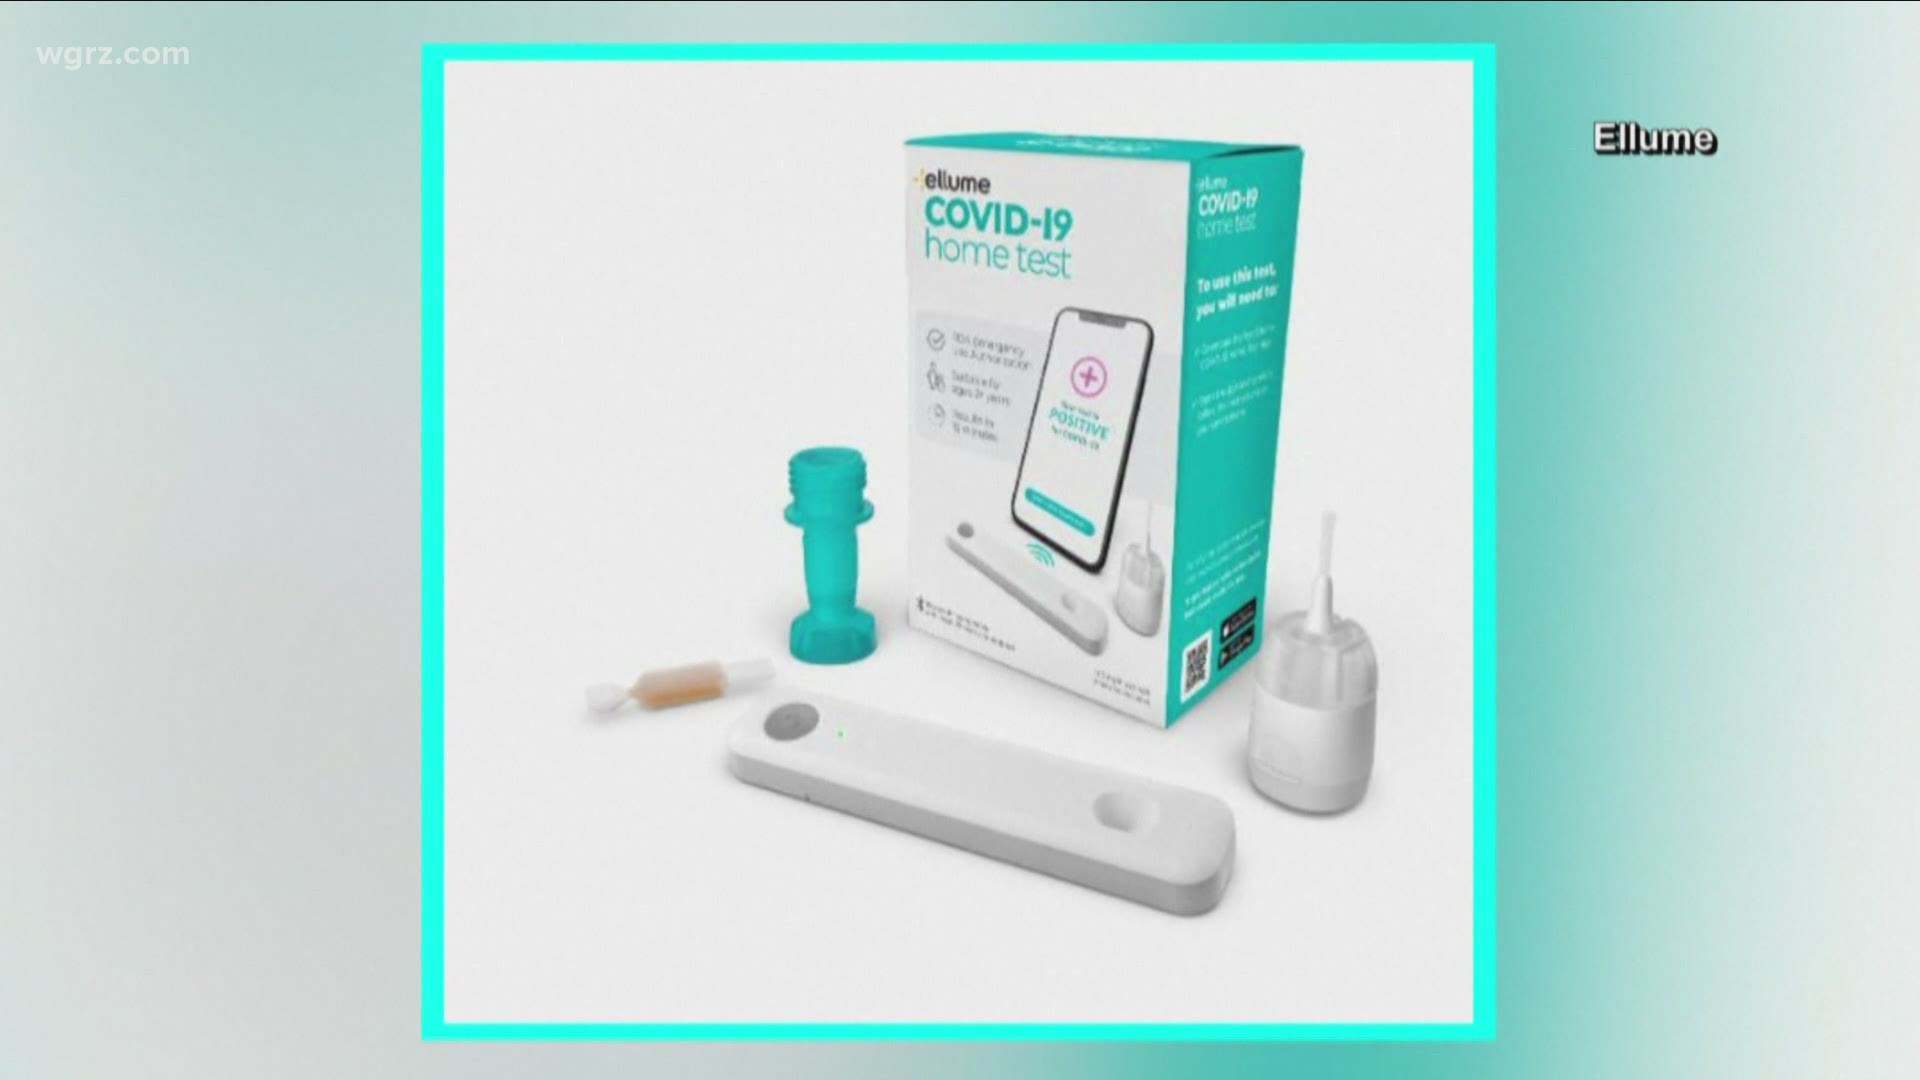 Two local major retailers say they're looking at possibly selling rapid at-home Covid testing kits in their stores.